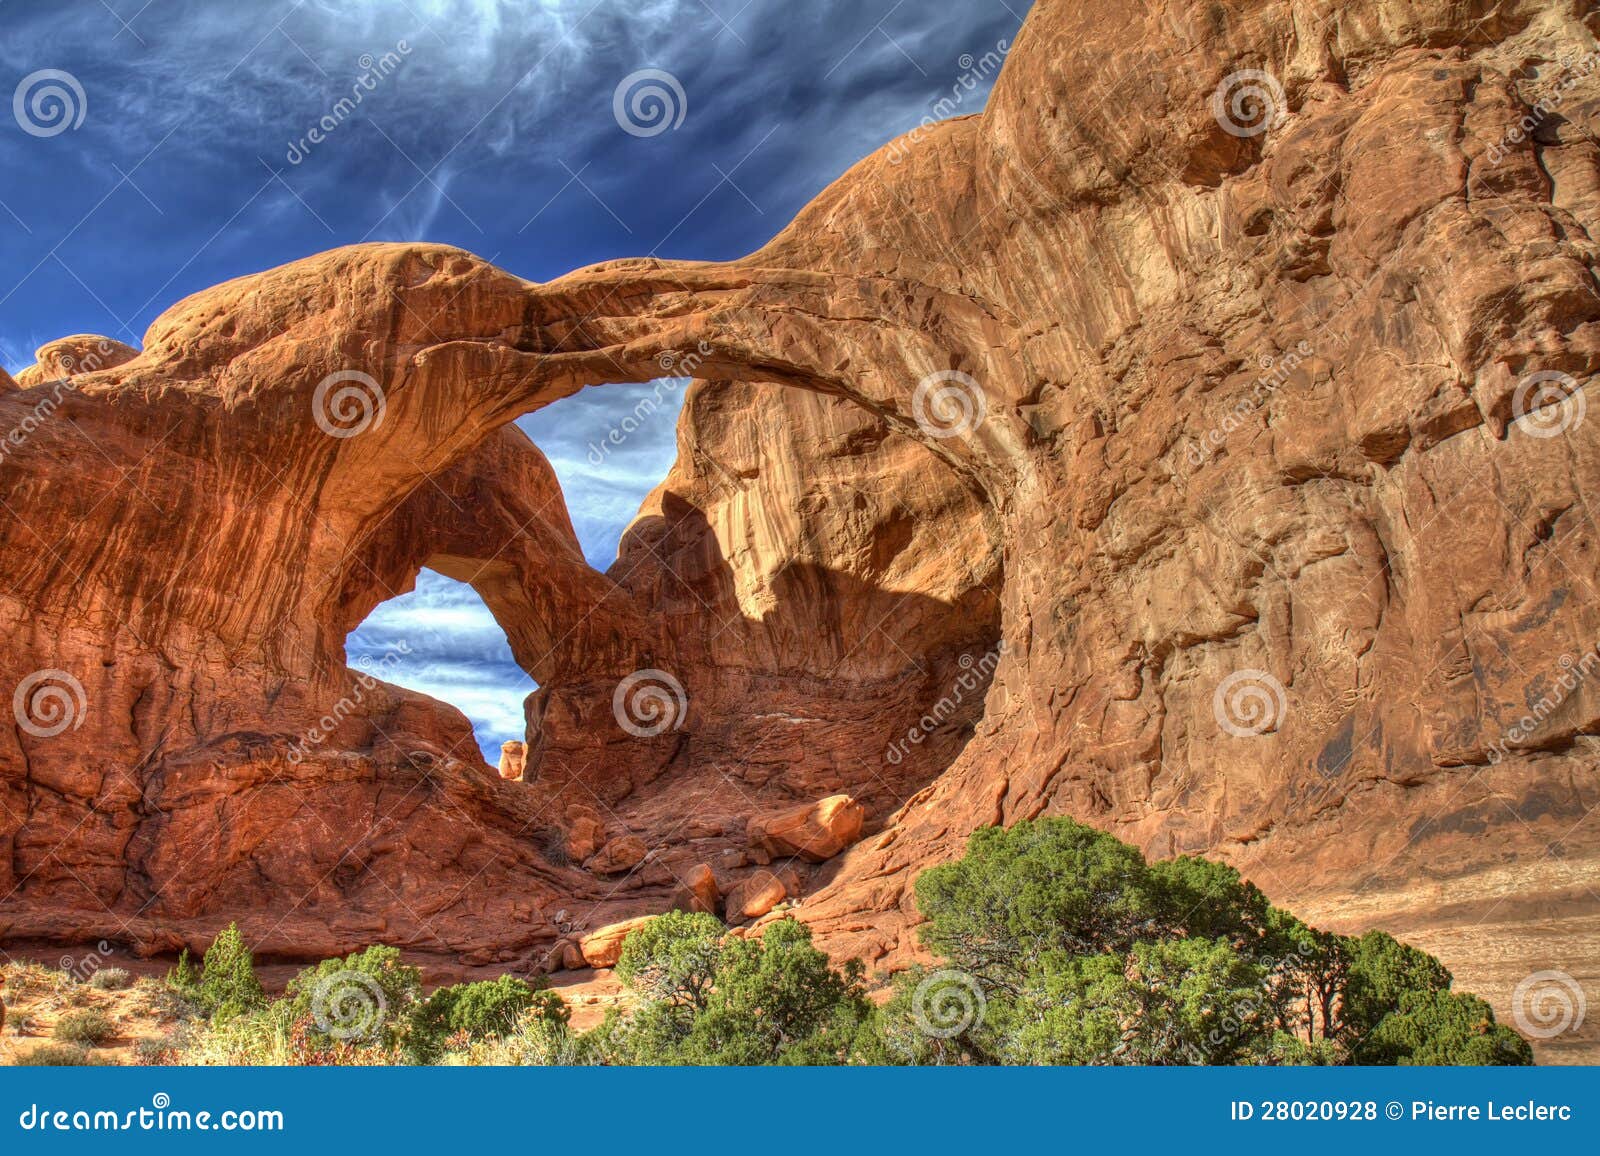 double arch in arches national park